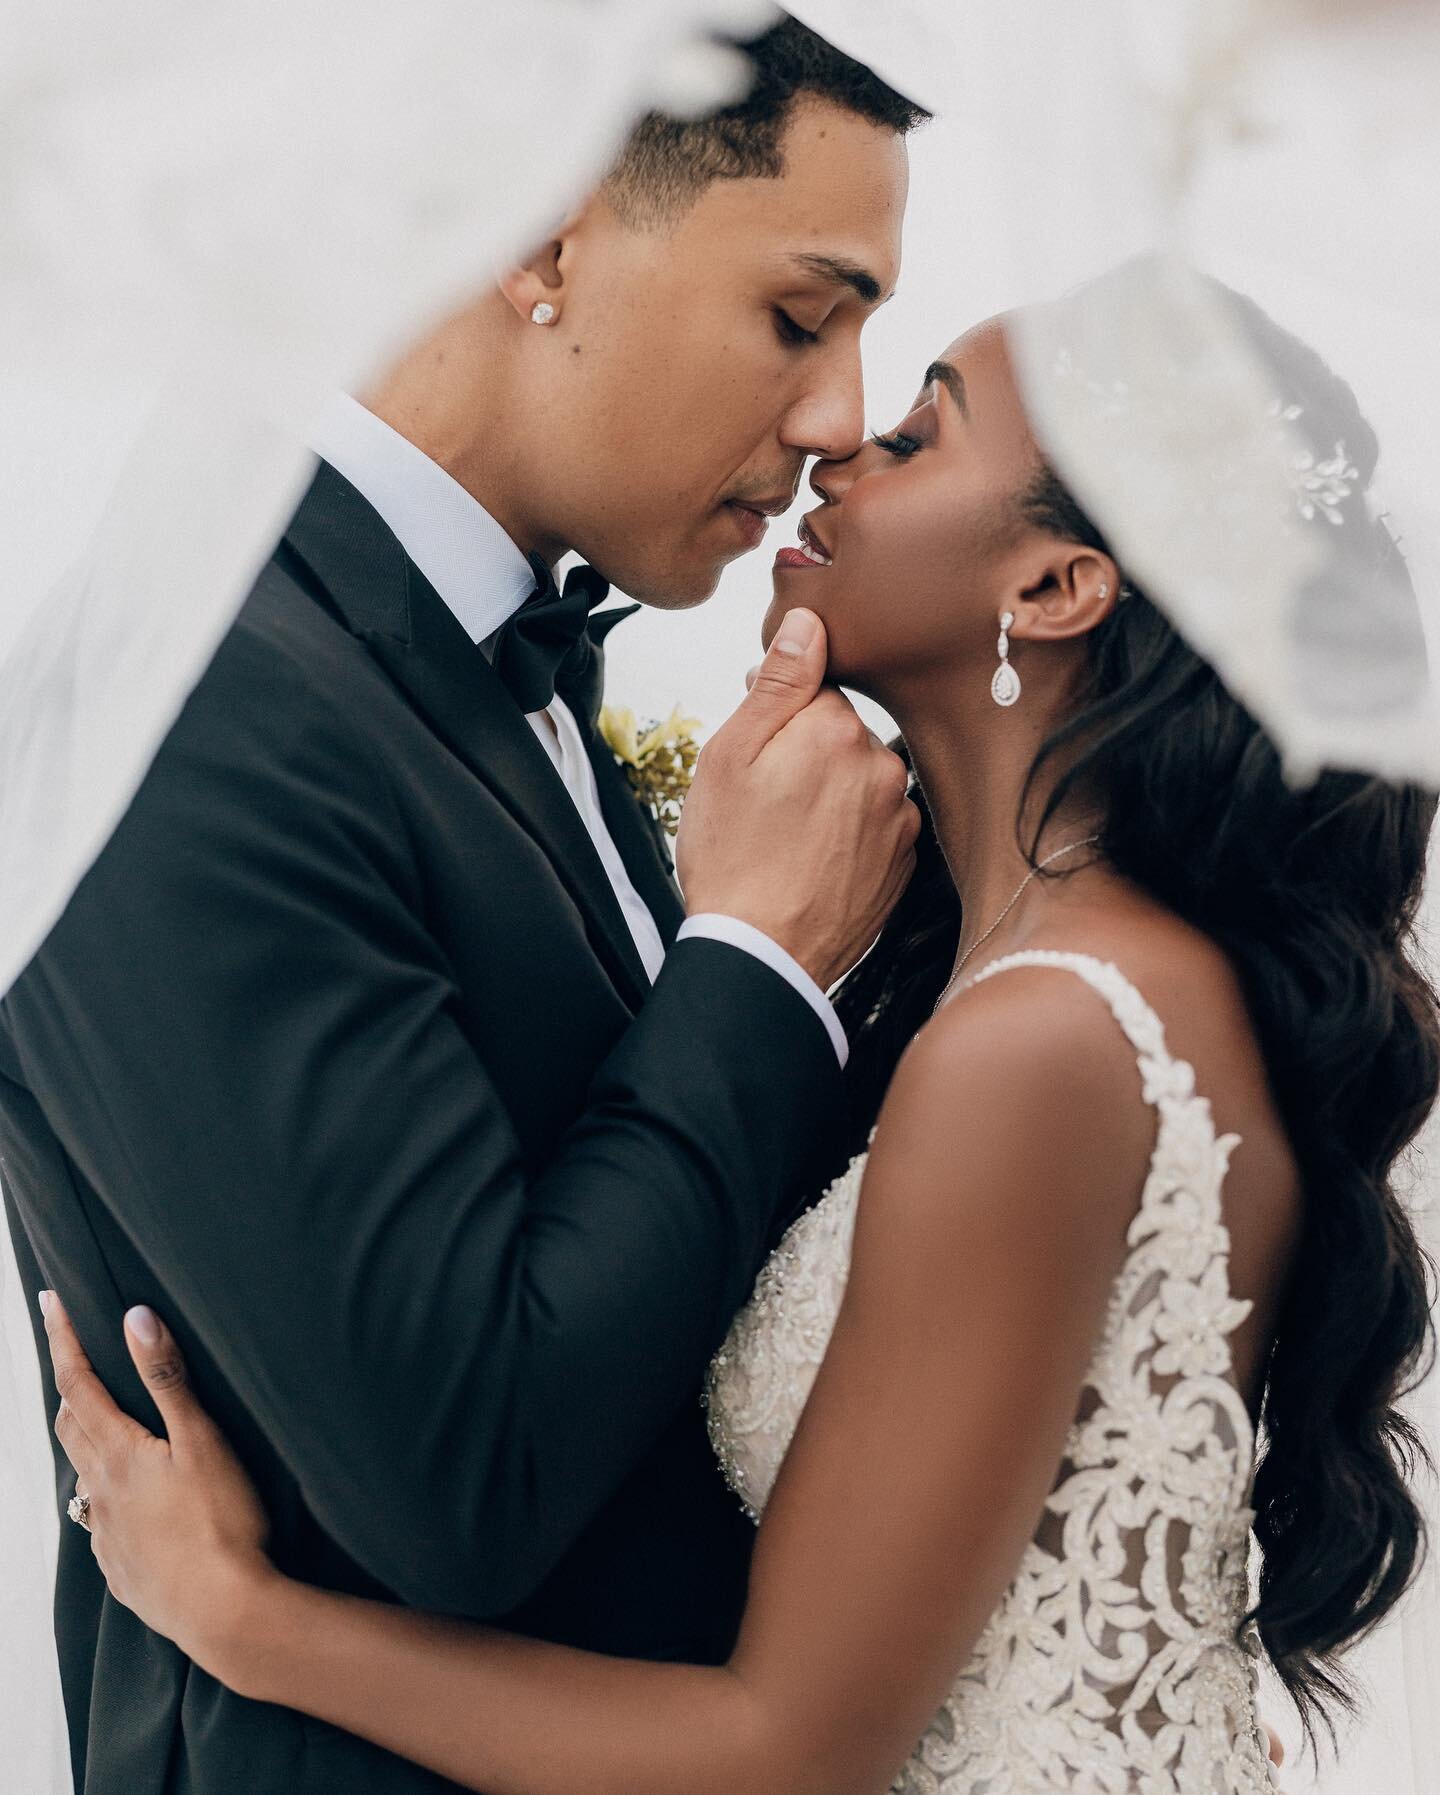 The love I have for you&hellip;
&mdash;

Photography &amp; Reel: @photosbyreem
Videography: @newrezmedia
Glam: @sglampro
Planner: @ebjevents